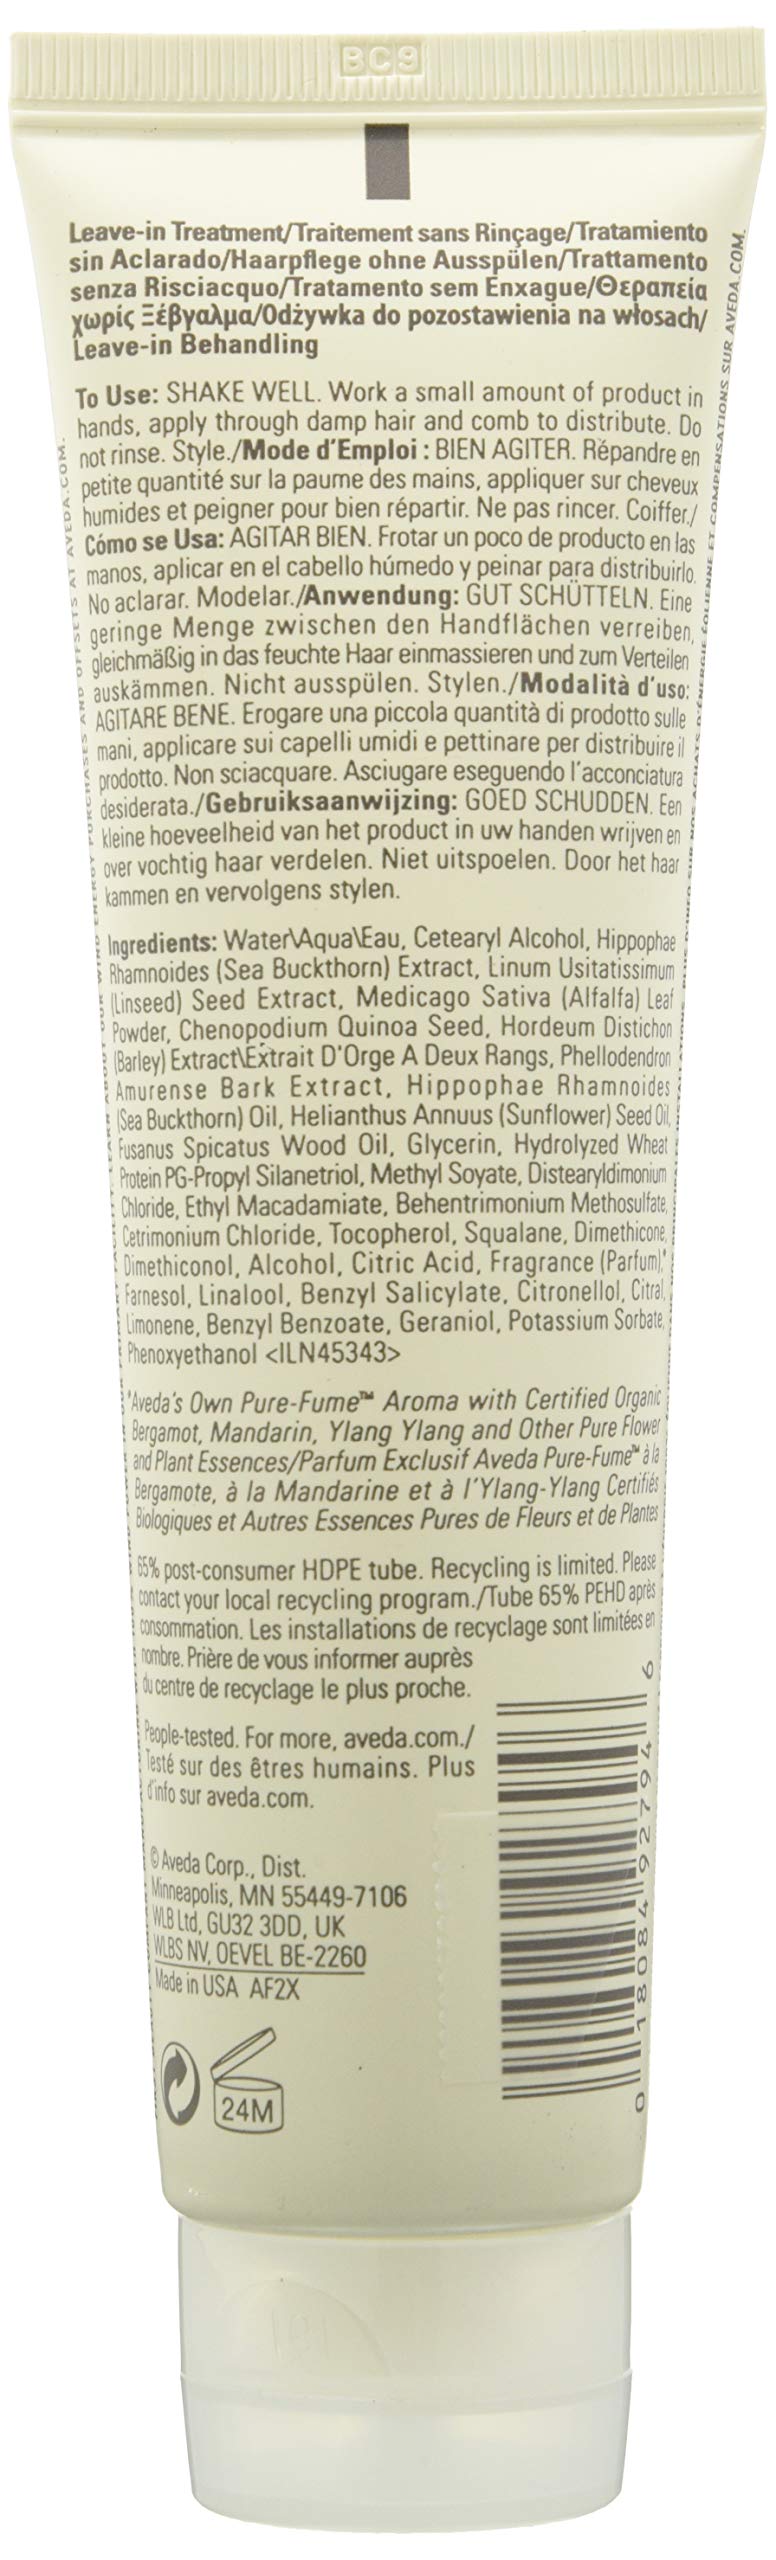 AVEDA Damage Remedy Daily Hair Repair Leave-in Treatment, 3.4 Fluid Ounce